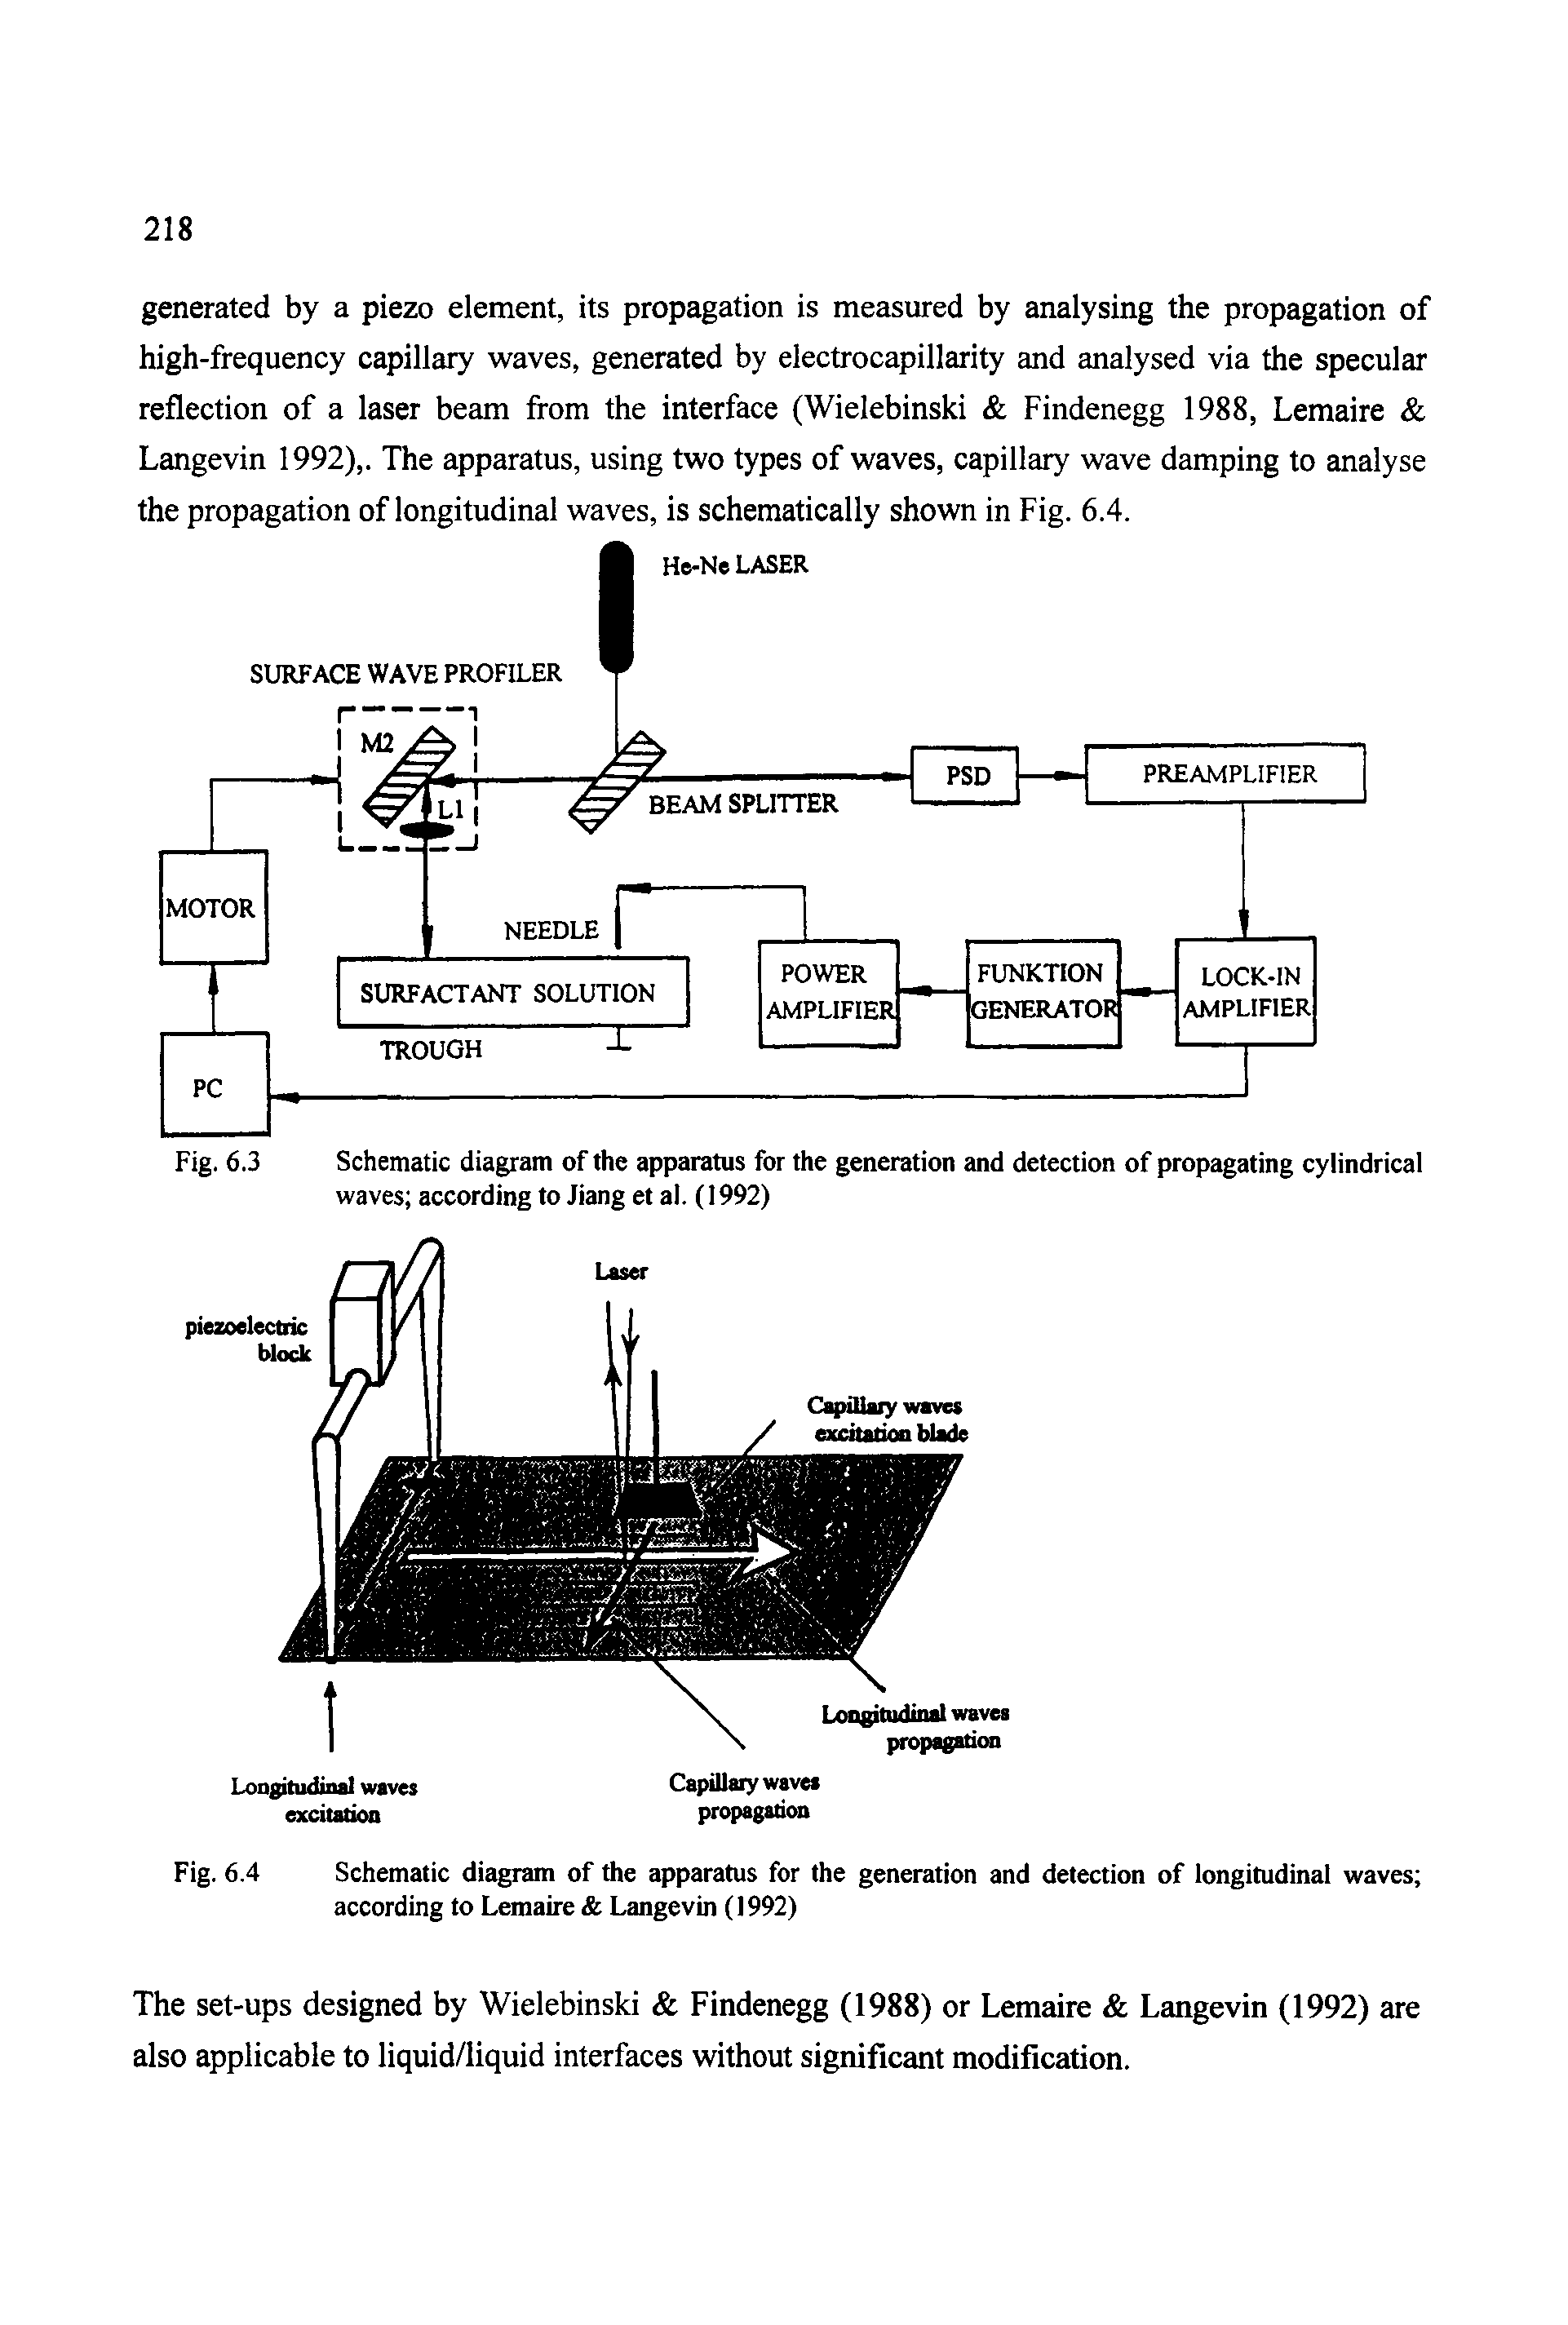 Schematic diagram of the apparatus for the generation and detection of propagating cylindrical waves according to Jiang et al. (1992)...